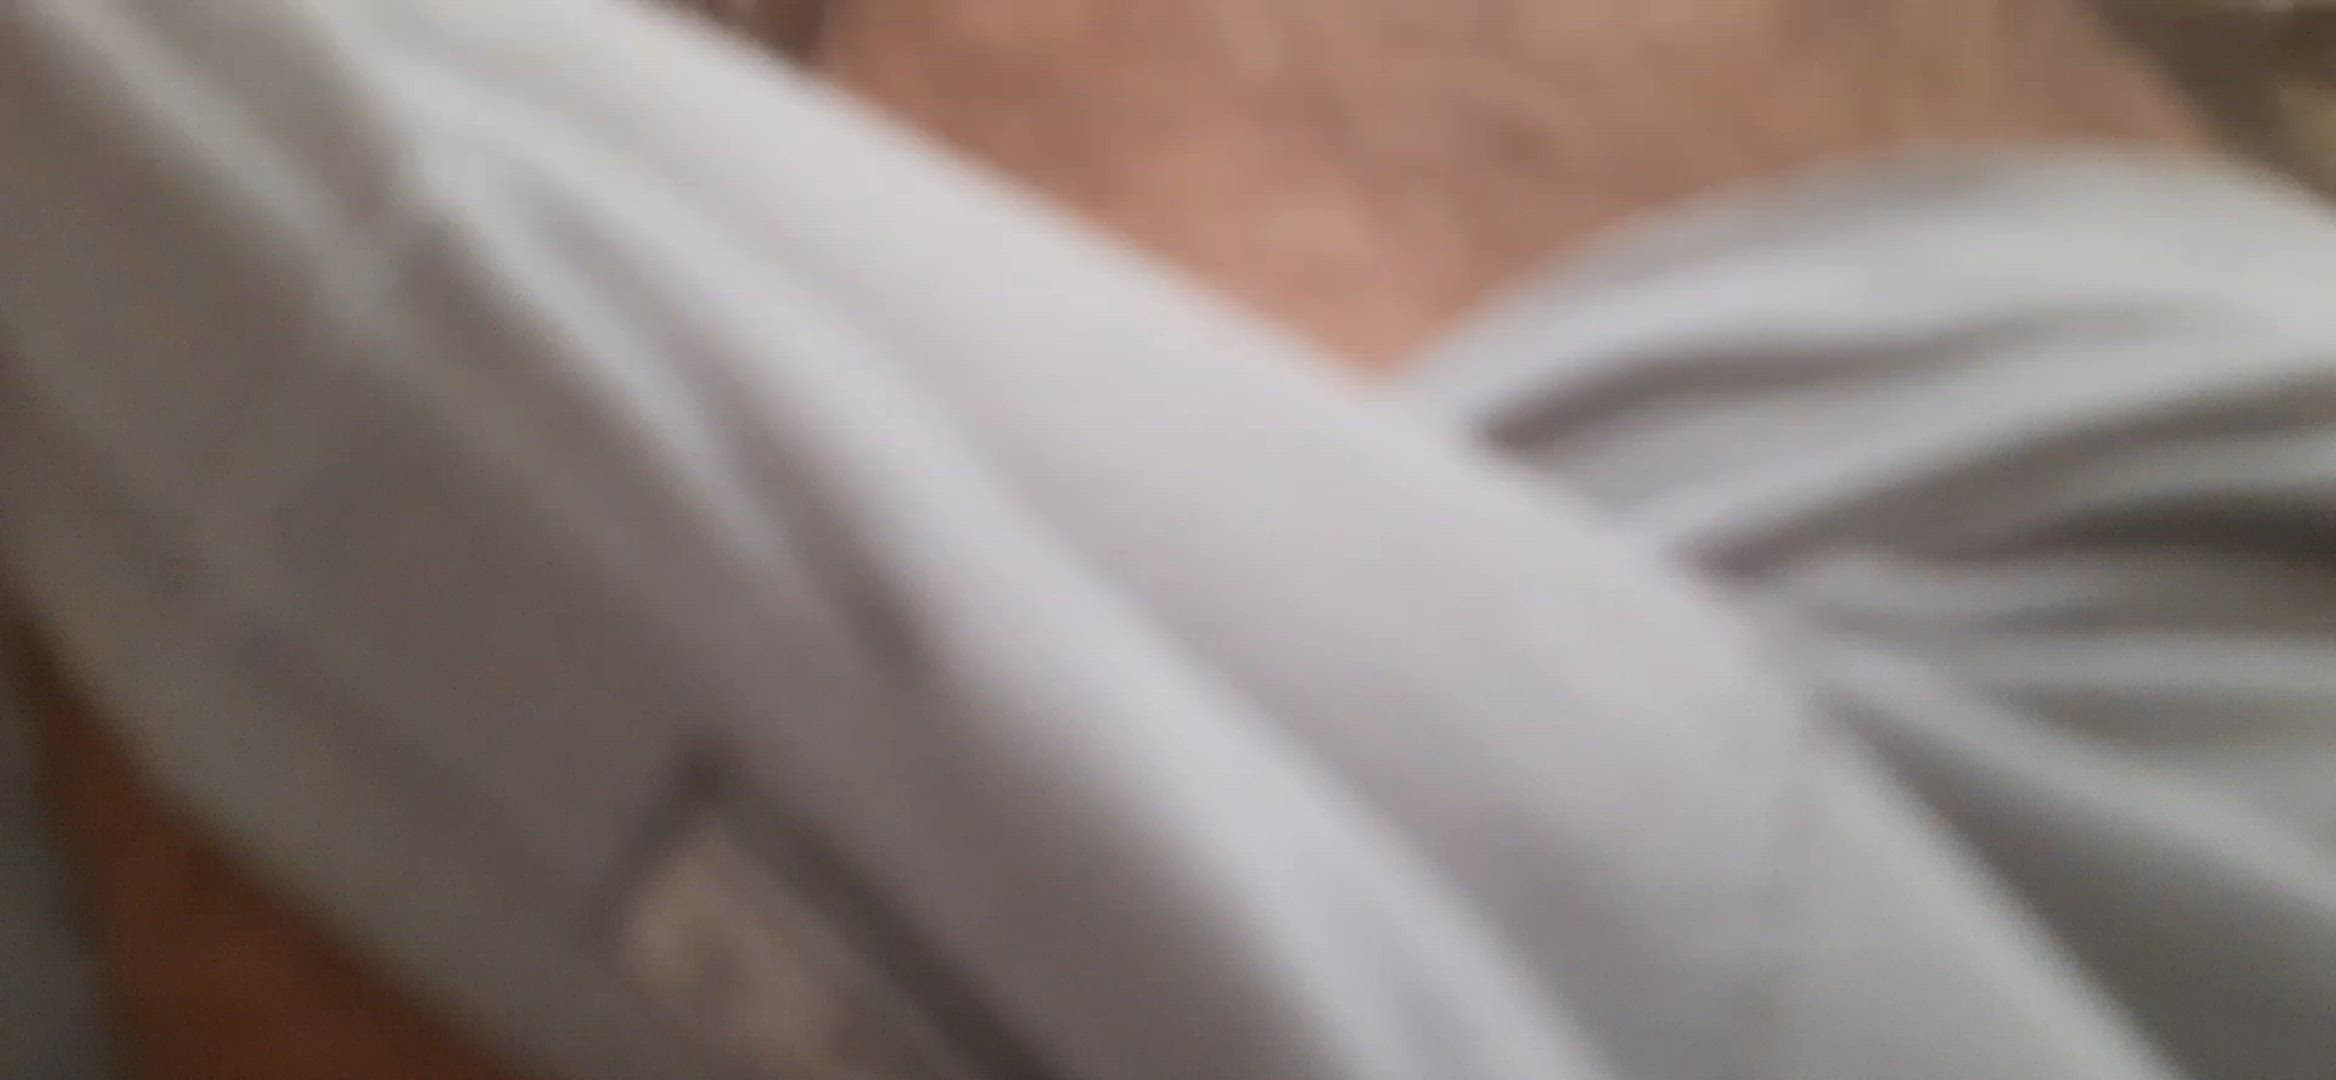 Cock porn video with onlyfans model amirlovexx <strong>@amirlovexx</strong>